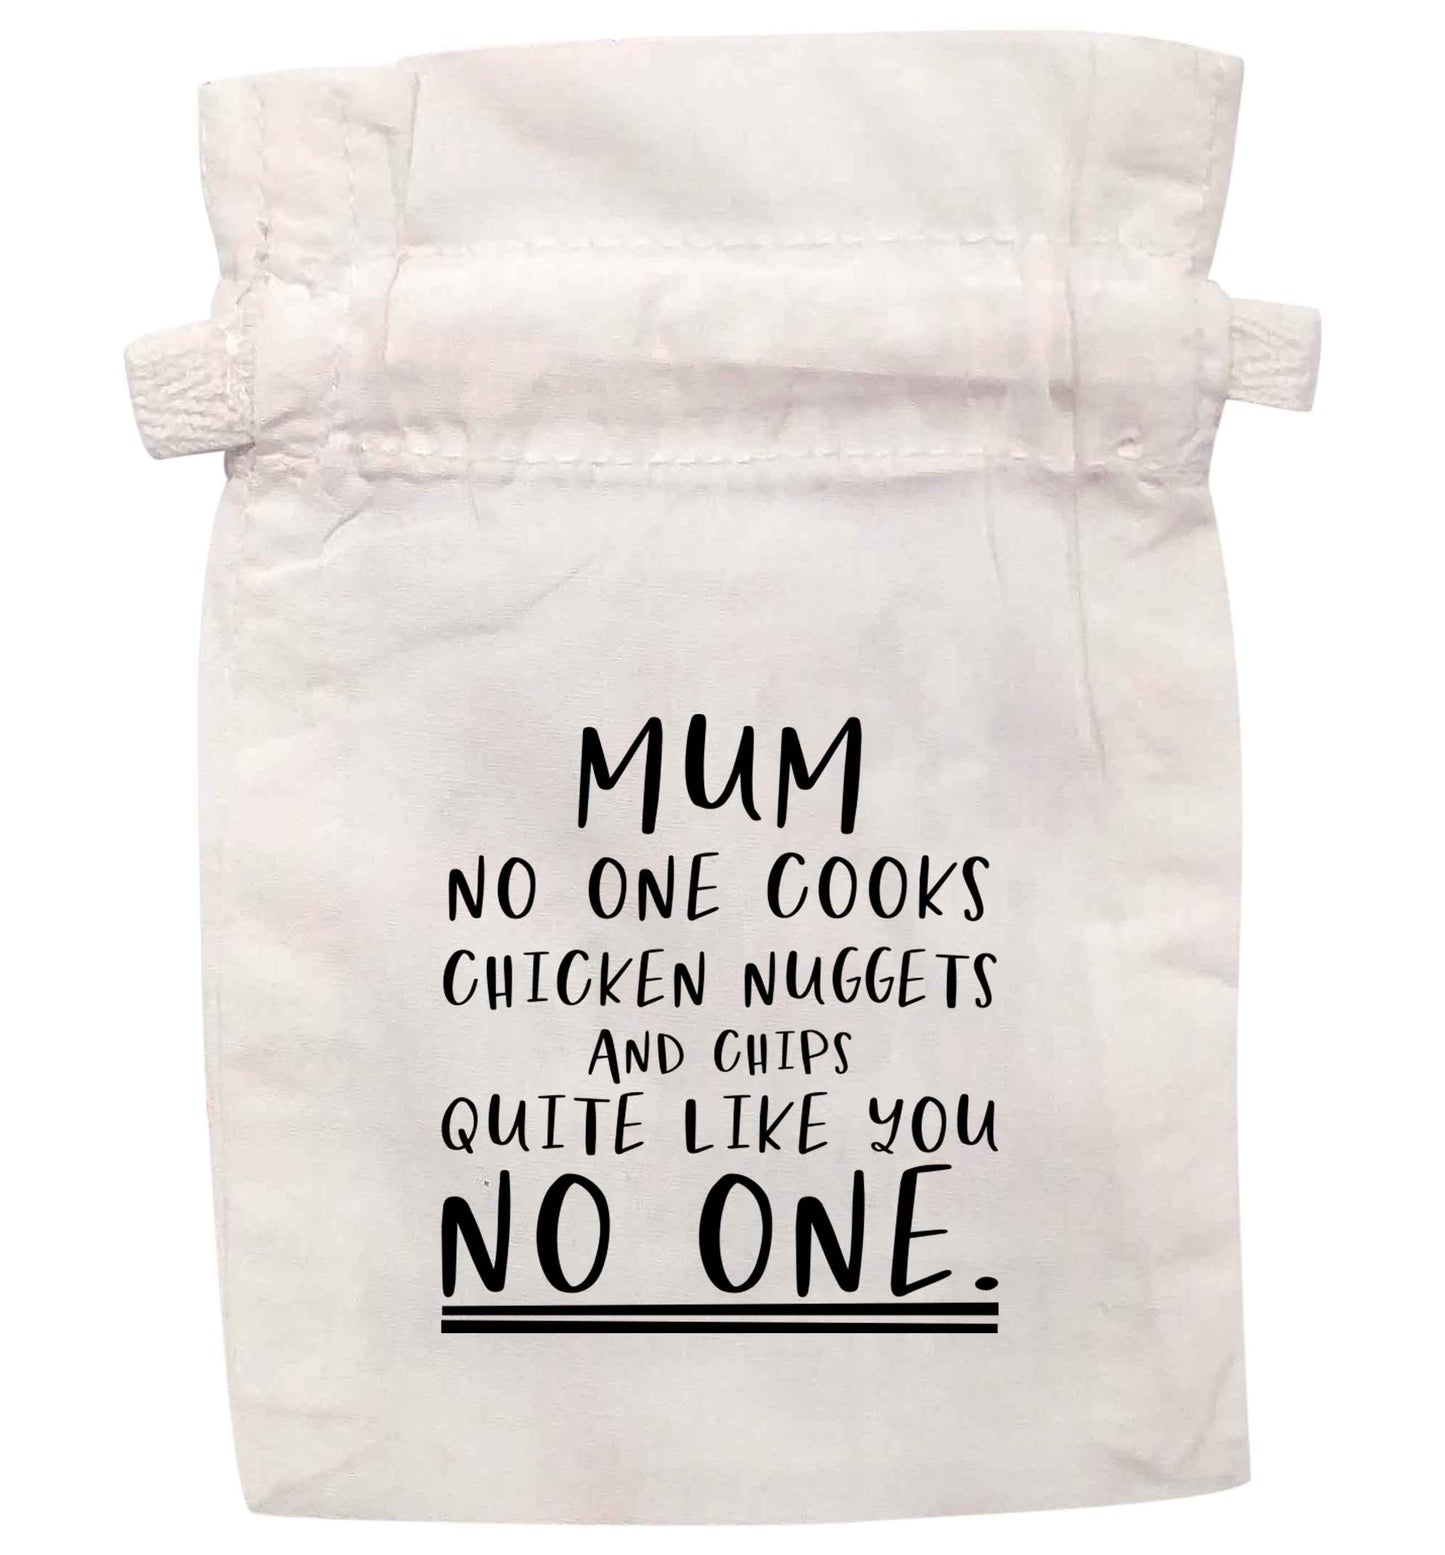 Mum no one cooks chicken nuggets and chips like you no one | XS - L | Pouch / Drawstring bag / Sack | Organic Cotton | Bulk discounts available!